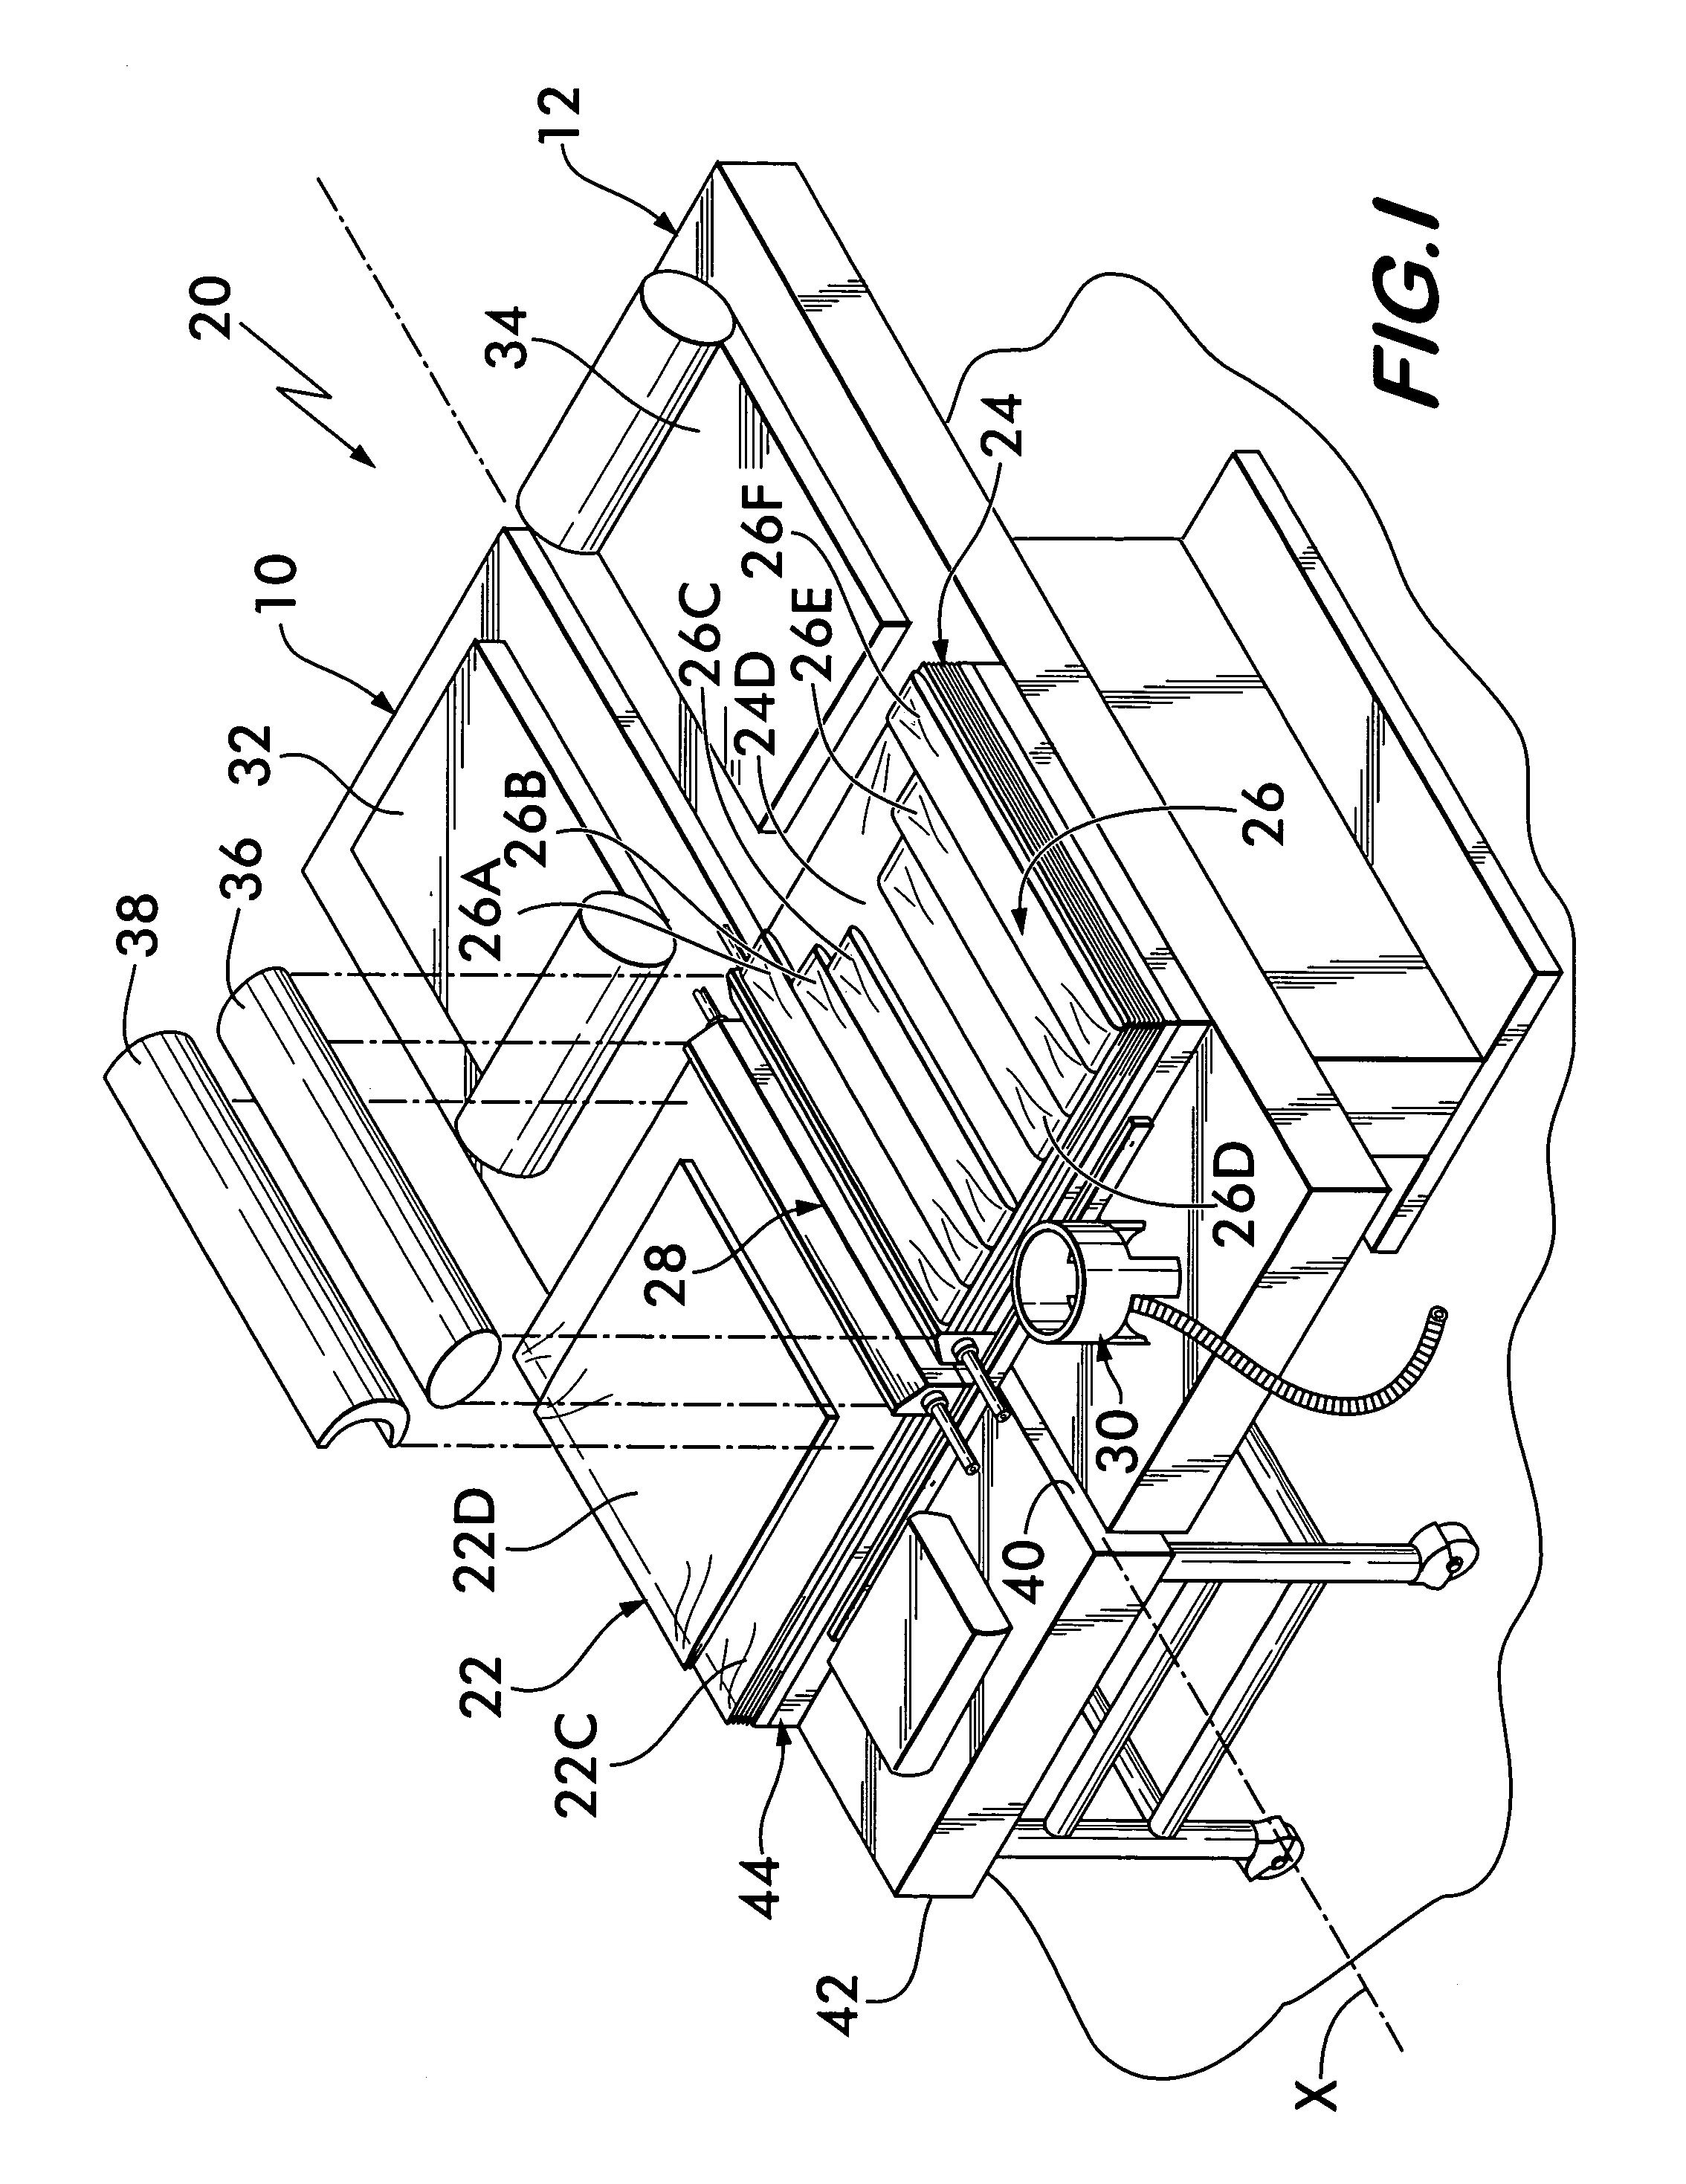 Transport and positioning system for use in hospital operating rooms